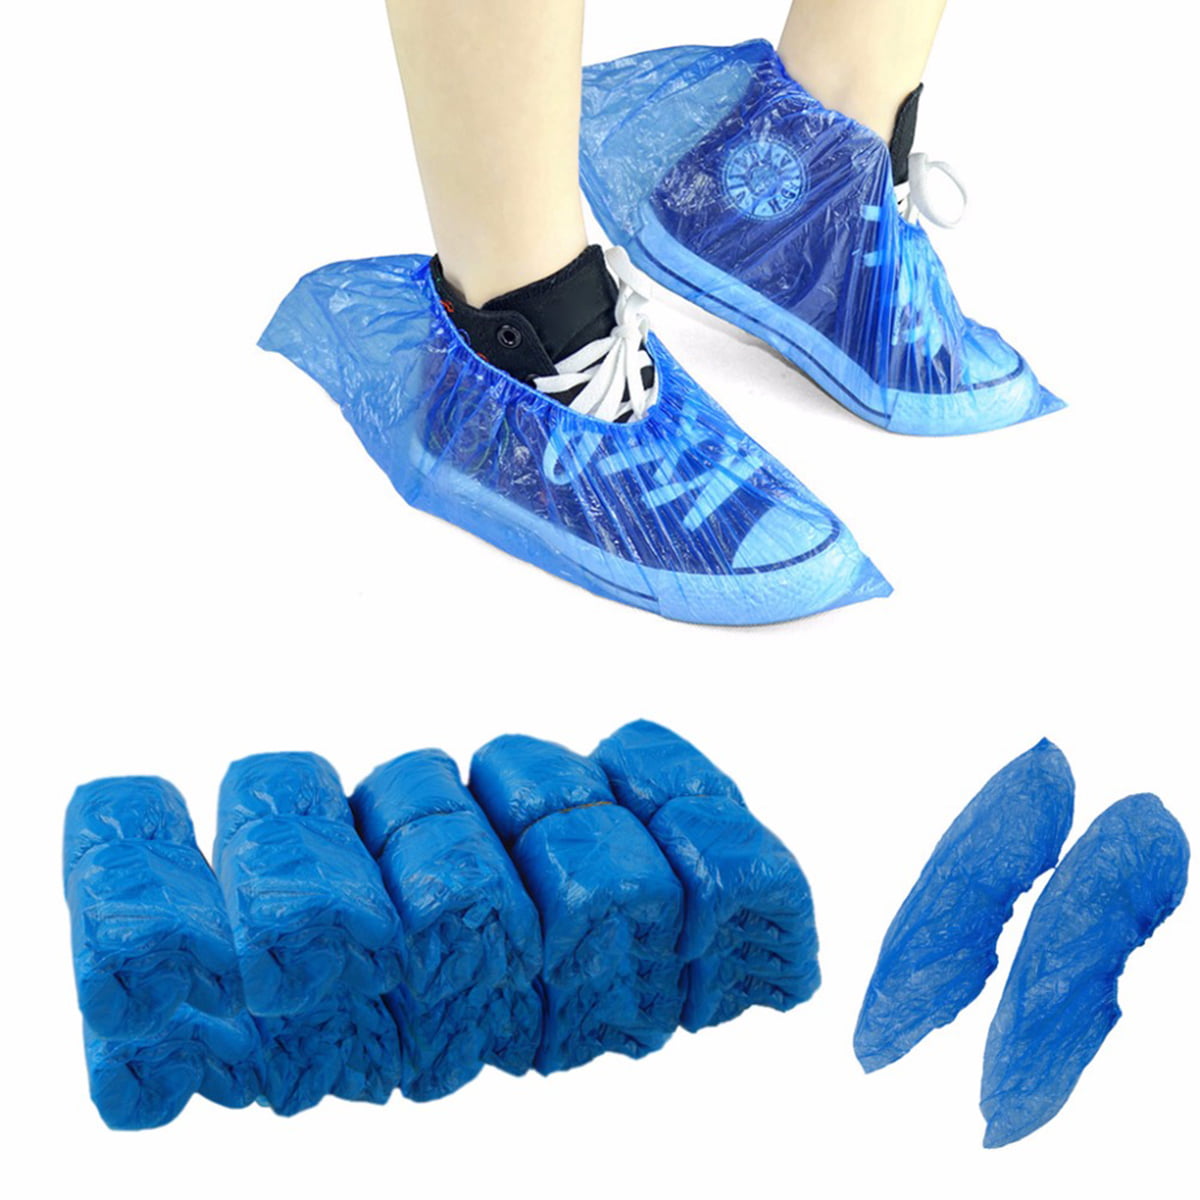 100 PCS Boot Cover Plastic Disposable Shoe Covers Overshoes Medical Waterproof 